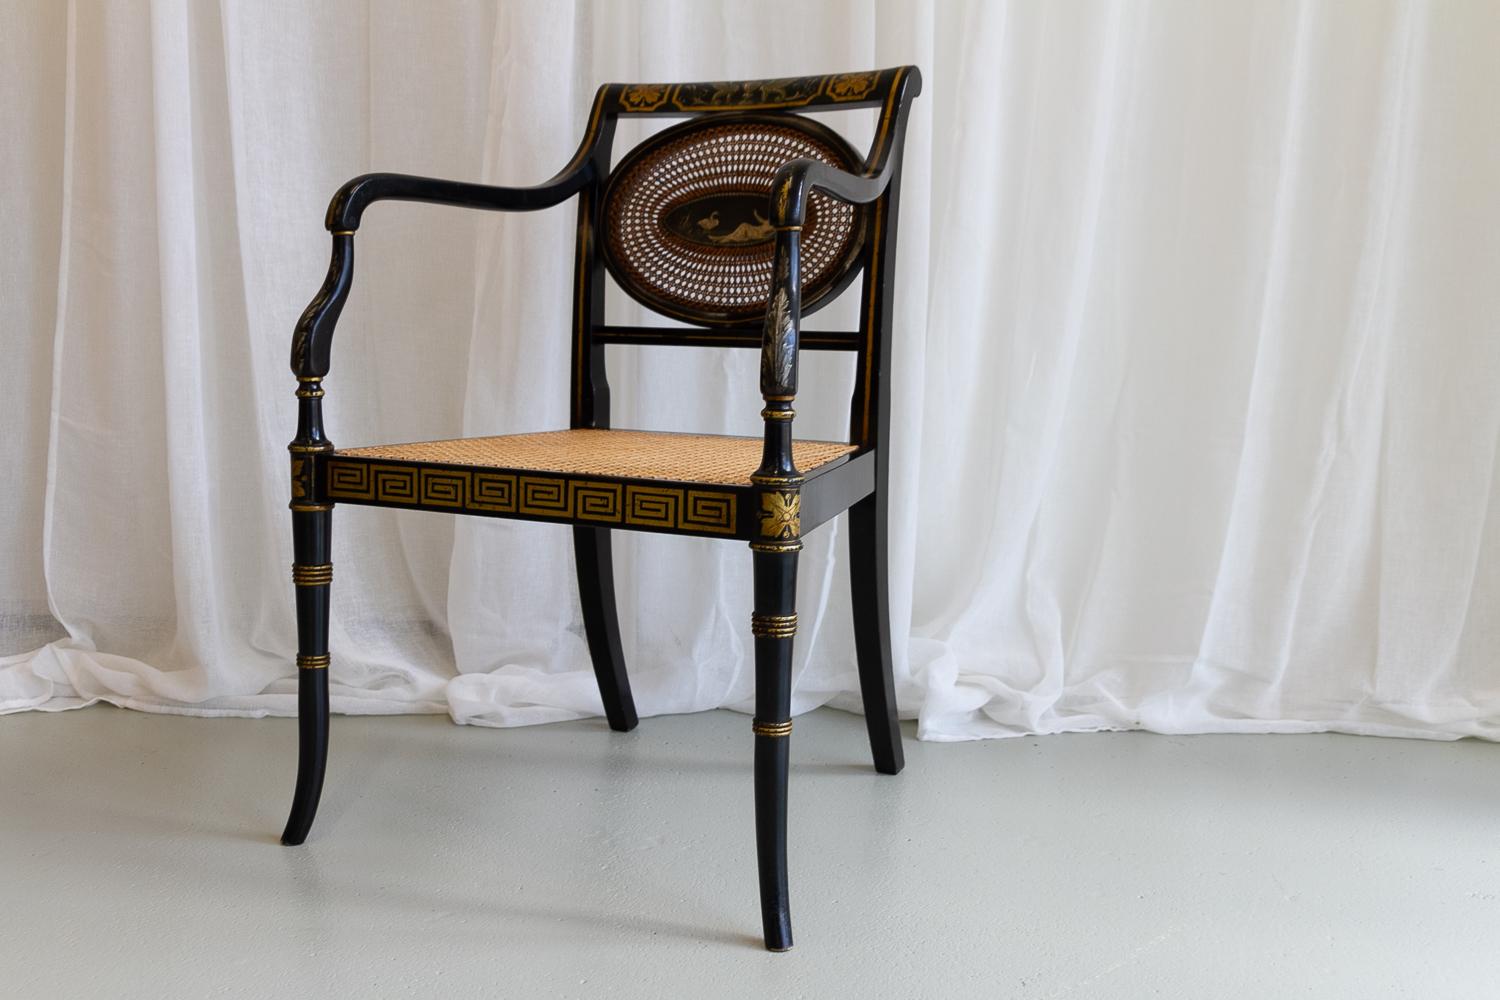 English Regency Black and Gold Armchair, 19th Century.

Antique shield back chair with hand painted reclining nude female and swan motif. The back stretcher is decorated with ornate griffins. Ebonized frame with golden Greek key patterns and